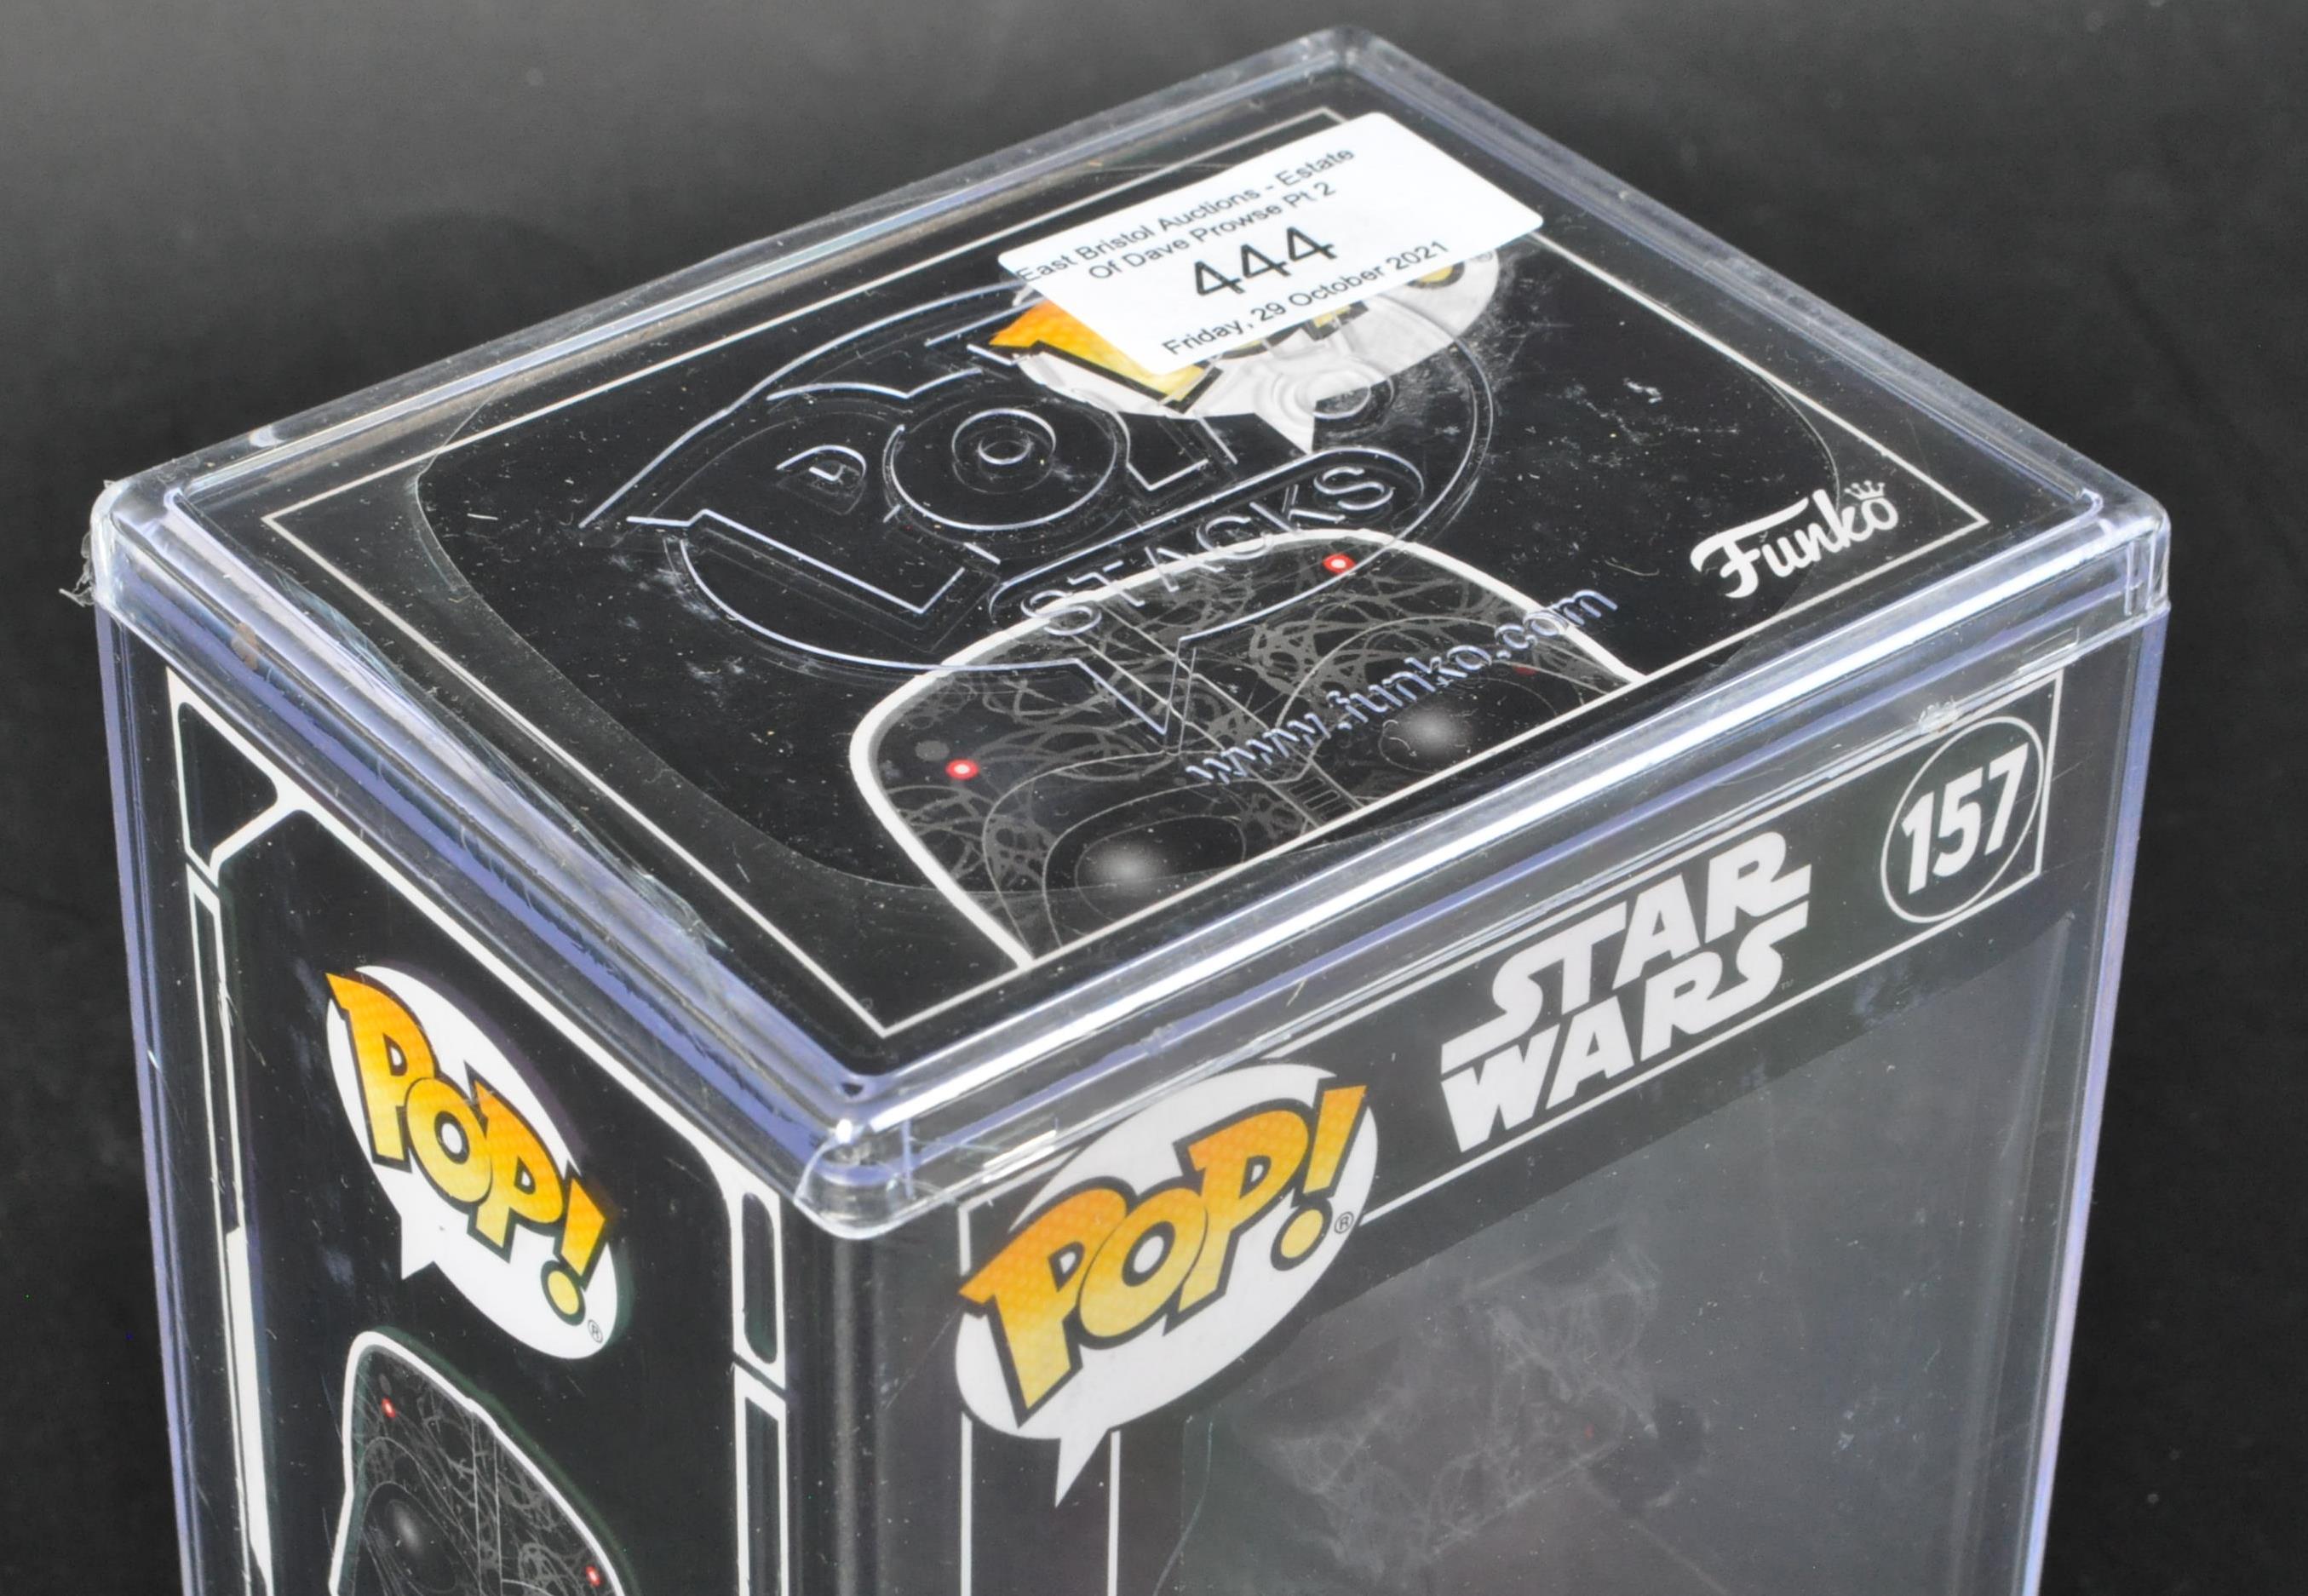 ESTATE OF DAVE PROWSE - STAR WARS - FUNKO POP DARTH VADER EXCLUSIVE - Image 3 of 3